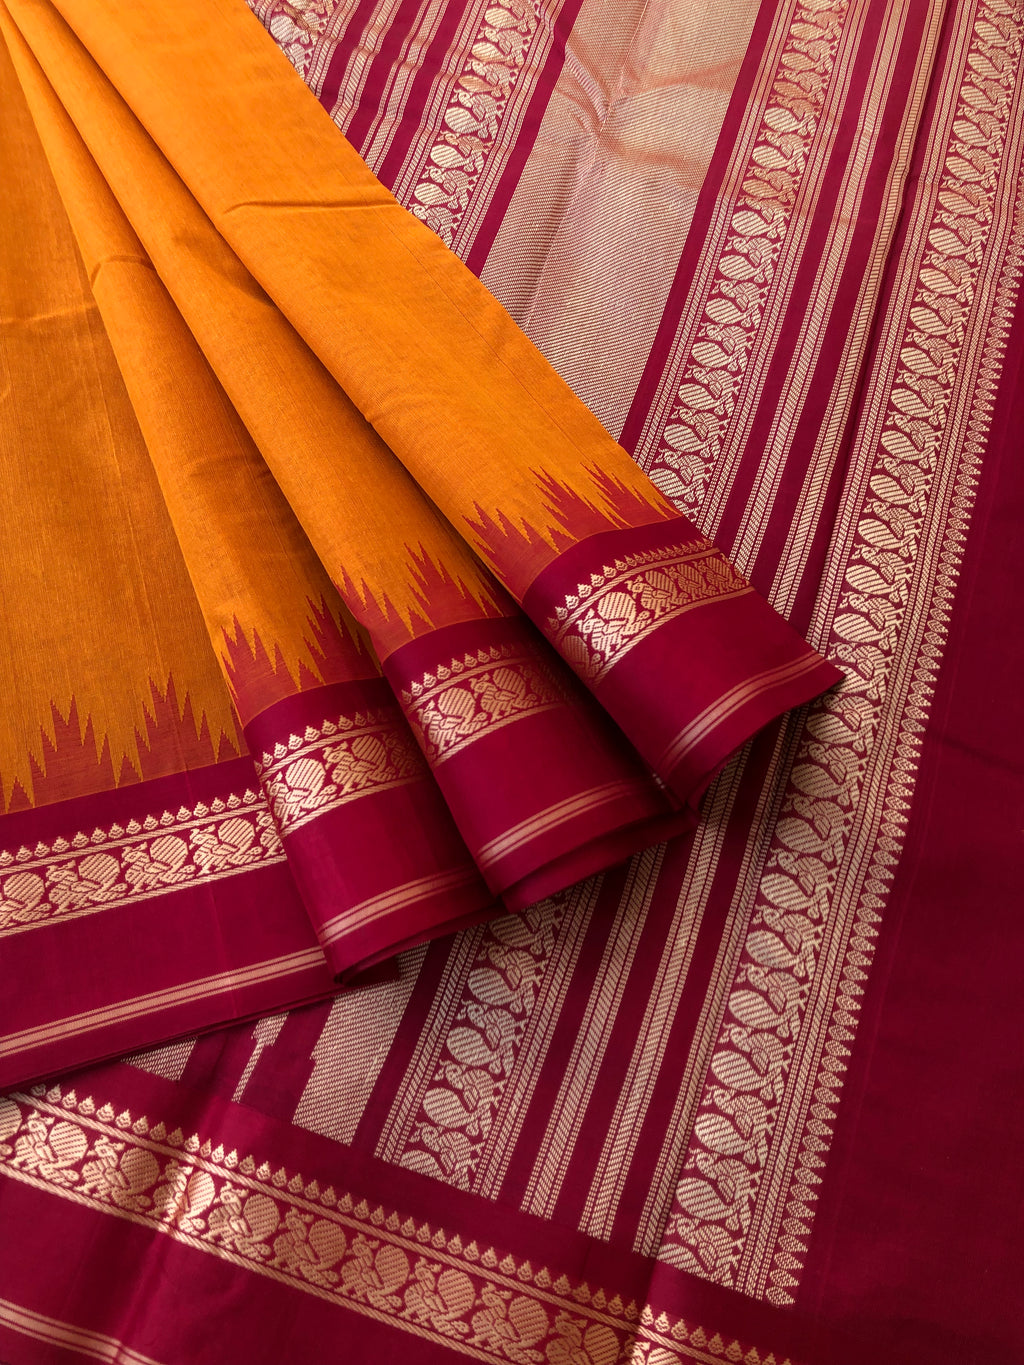 Cotton body with Pure Silk Borders - turmeric and deep red is a gorgeous traditional combination